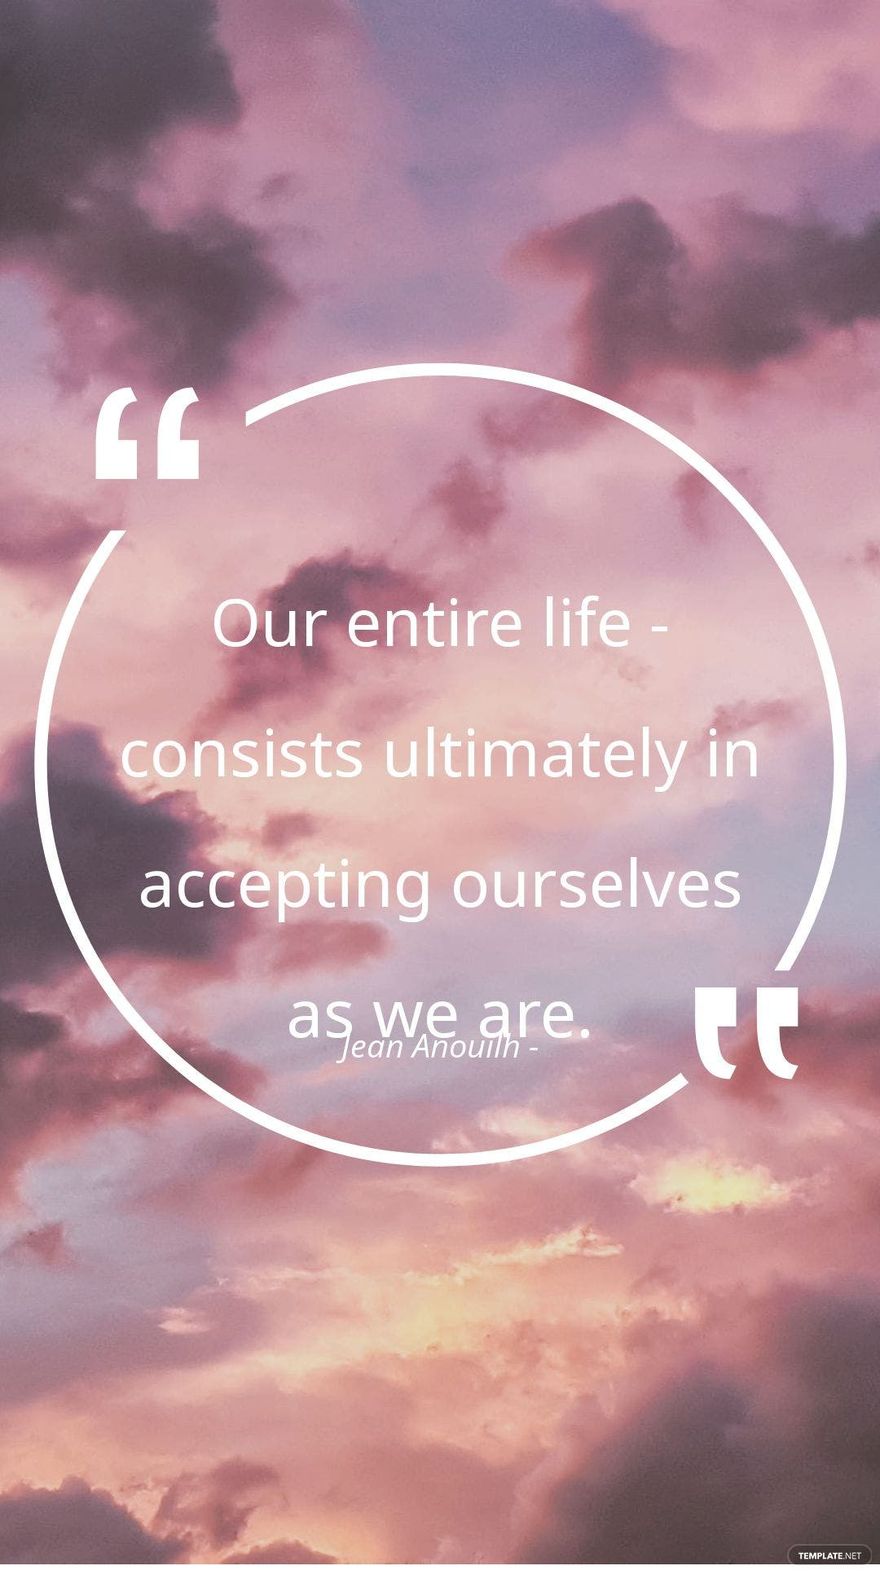 Jean Anouilh - Our entire life - consists ultimately in accepting ourselves as we are.